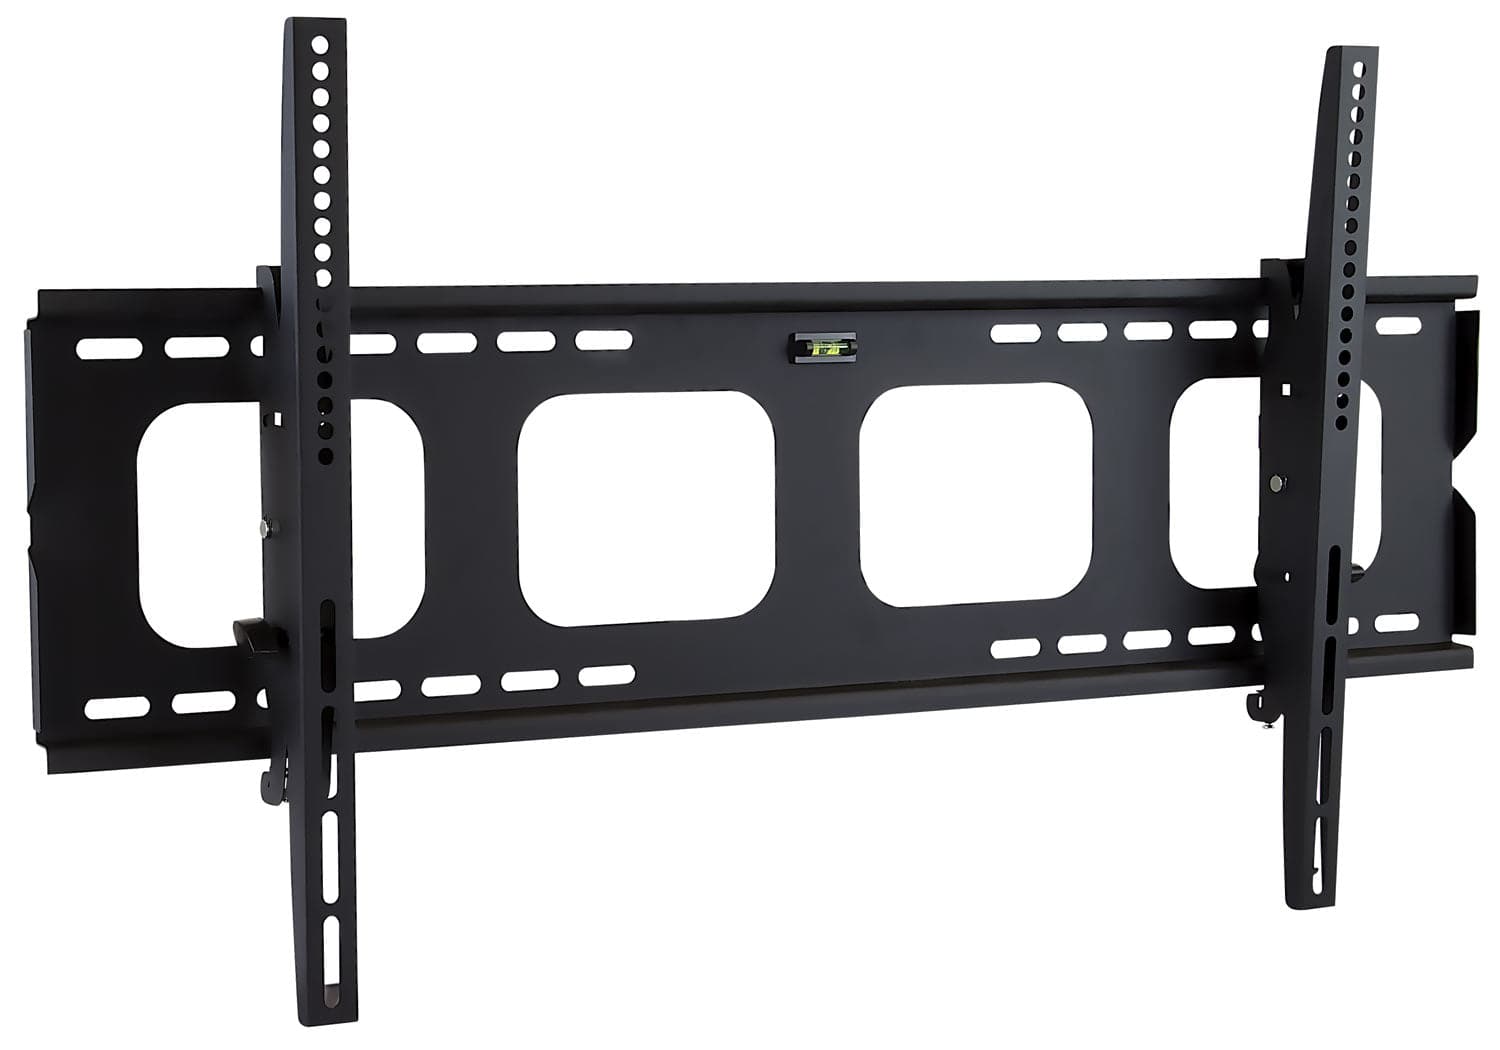 Rhino Brackets Articulating Curved and Flat Panel Single Stud TV